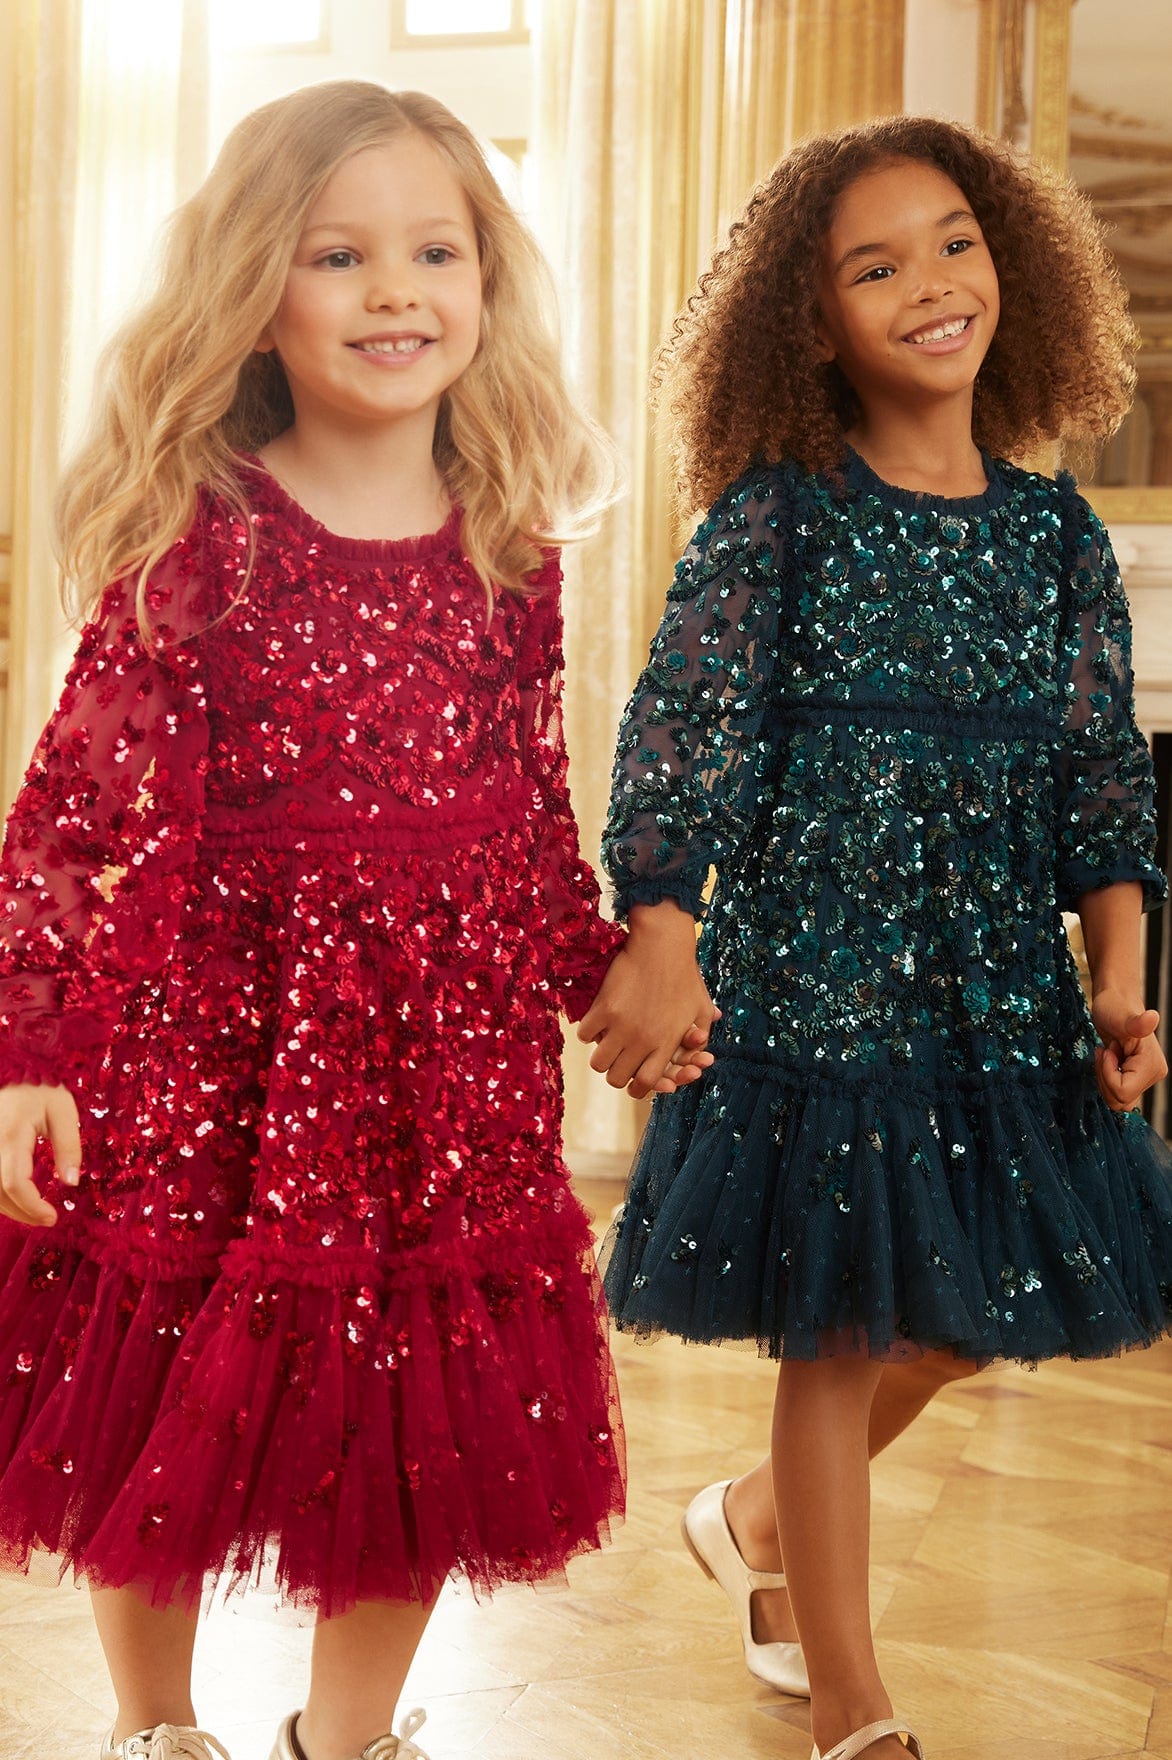 Kid's A-Line Dress Tulle Embroidered with Sequins and Printed with